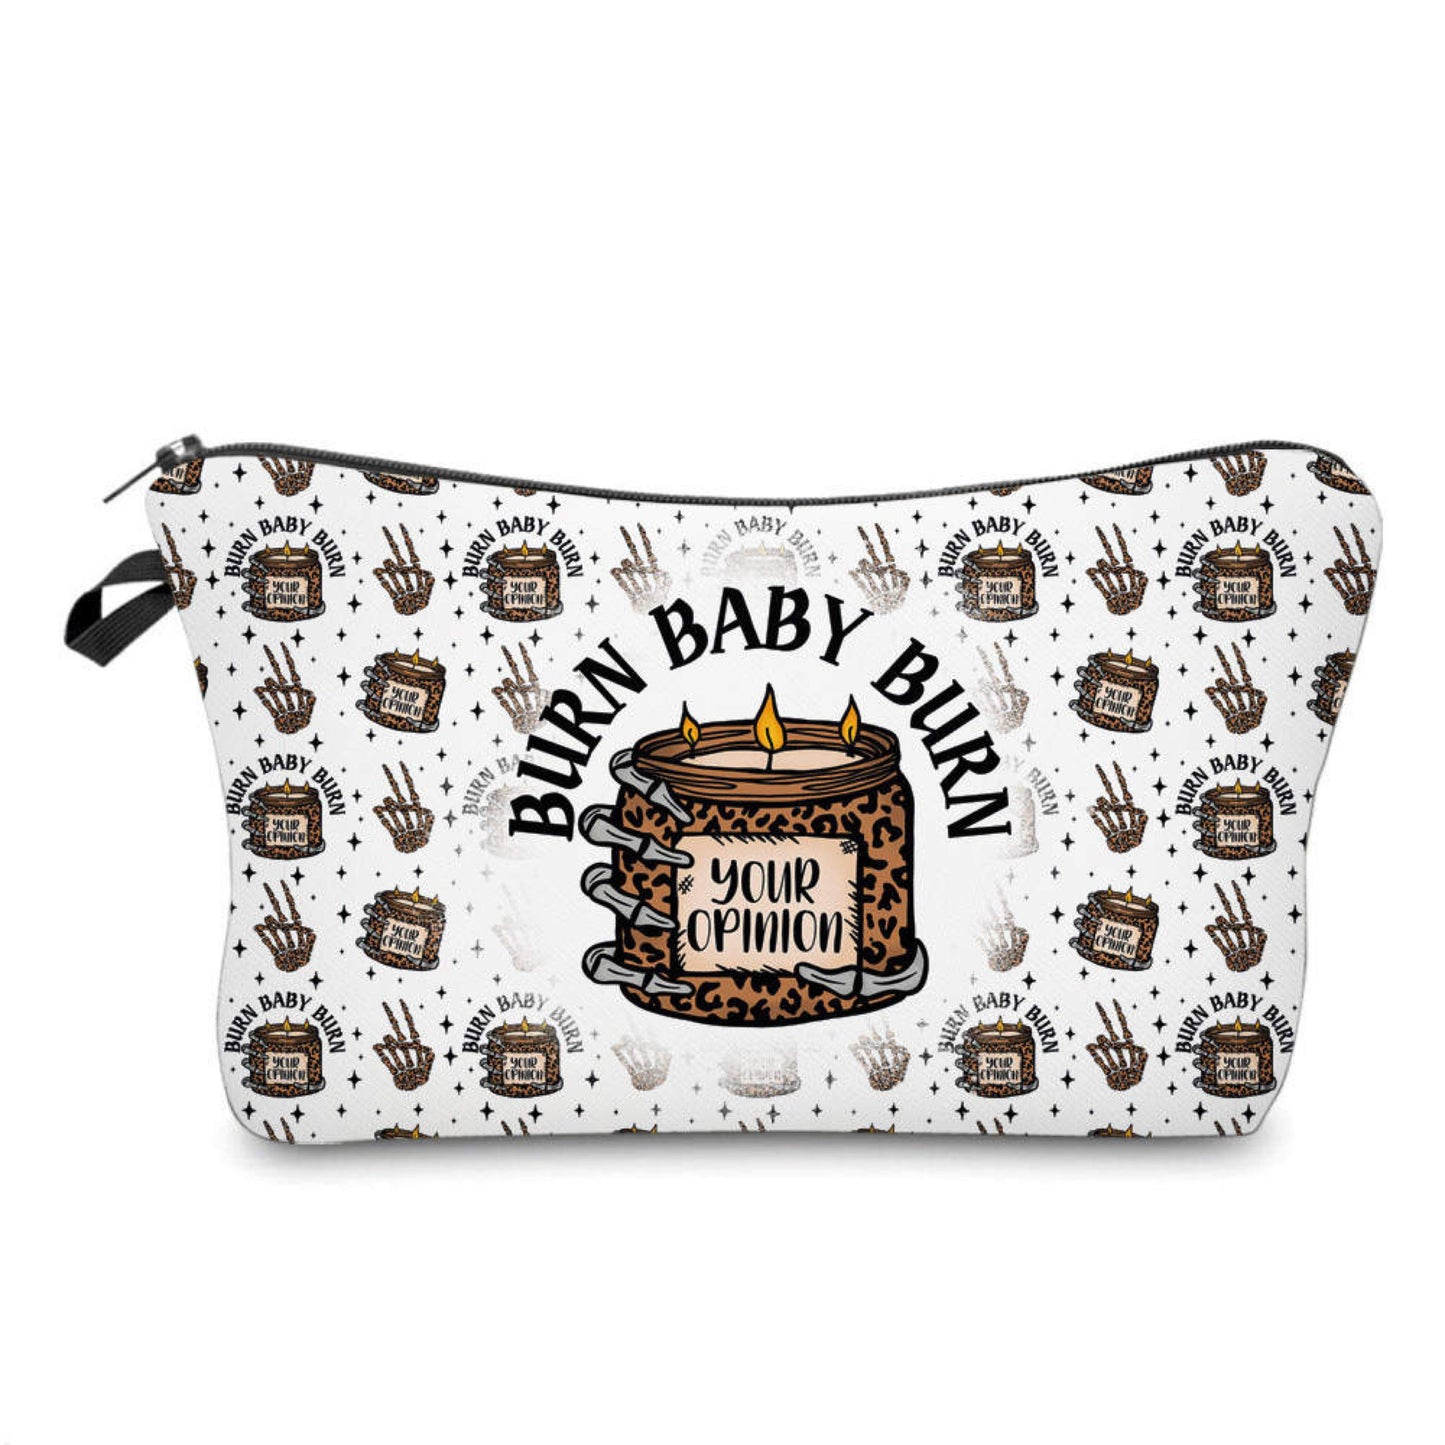 Pouch - Candle Burn Baby Burn *While Supplies Last*